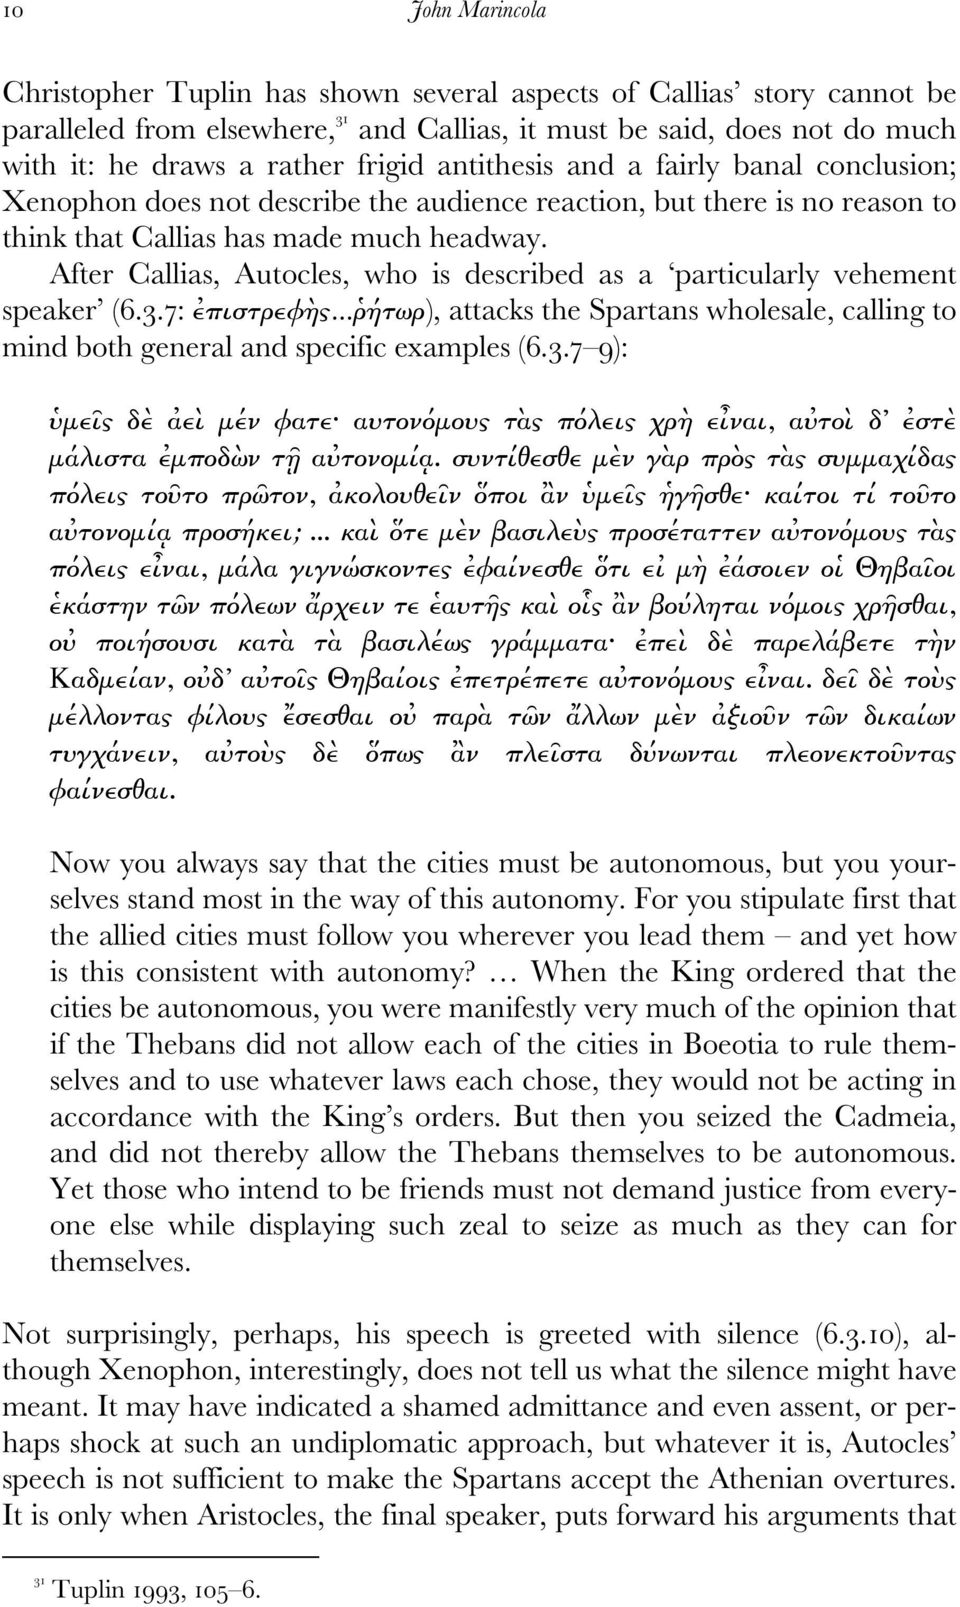 After Callias, Autocles, who is described as a particularly vehement speaker (6.3.7: ἐπιστρεφὴς...ῥήτωρ), attacks the Spartans wholesale, calling to mind both general and specific examples (6.3.7 9): ὑµεῖς δὲ ἀεὶ µέν φατε αυτονόµους τὰς πόλεις χρὴ εἶναι, αὐτοὶ δ ἐστὲ µάλιστα ἐµποδὼν τῇ αὐτονοµίᾳ.